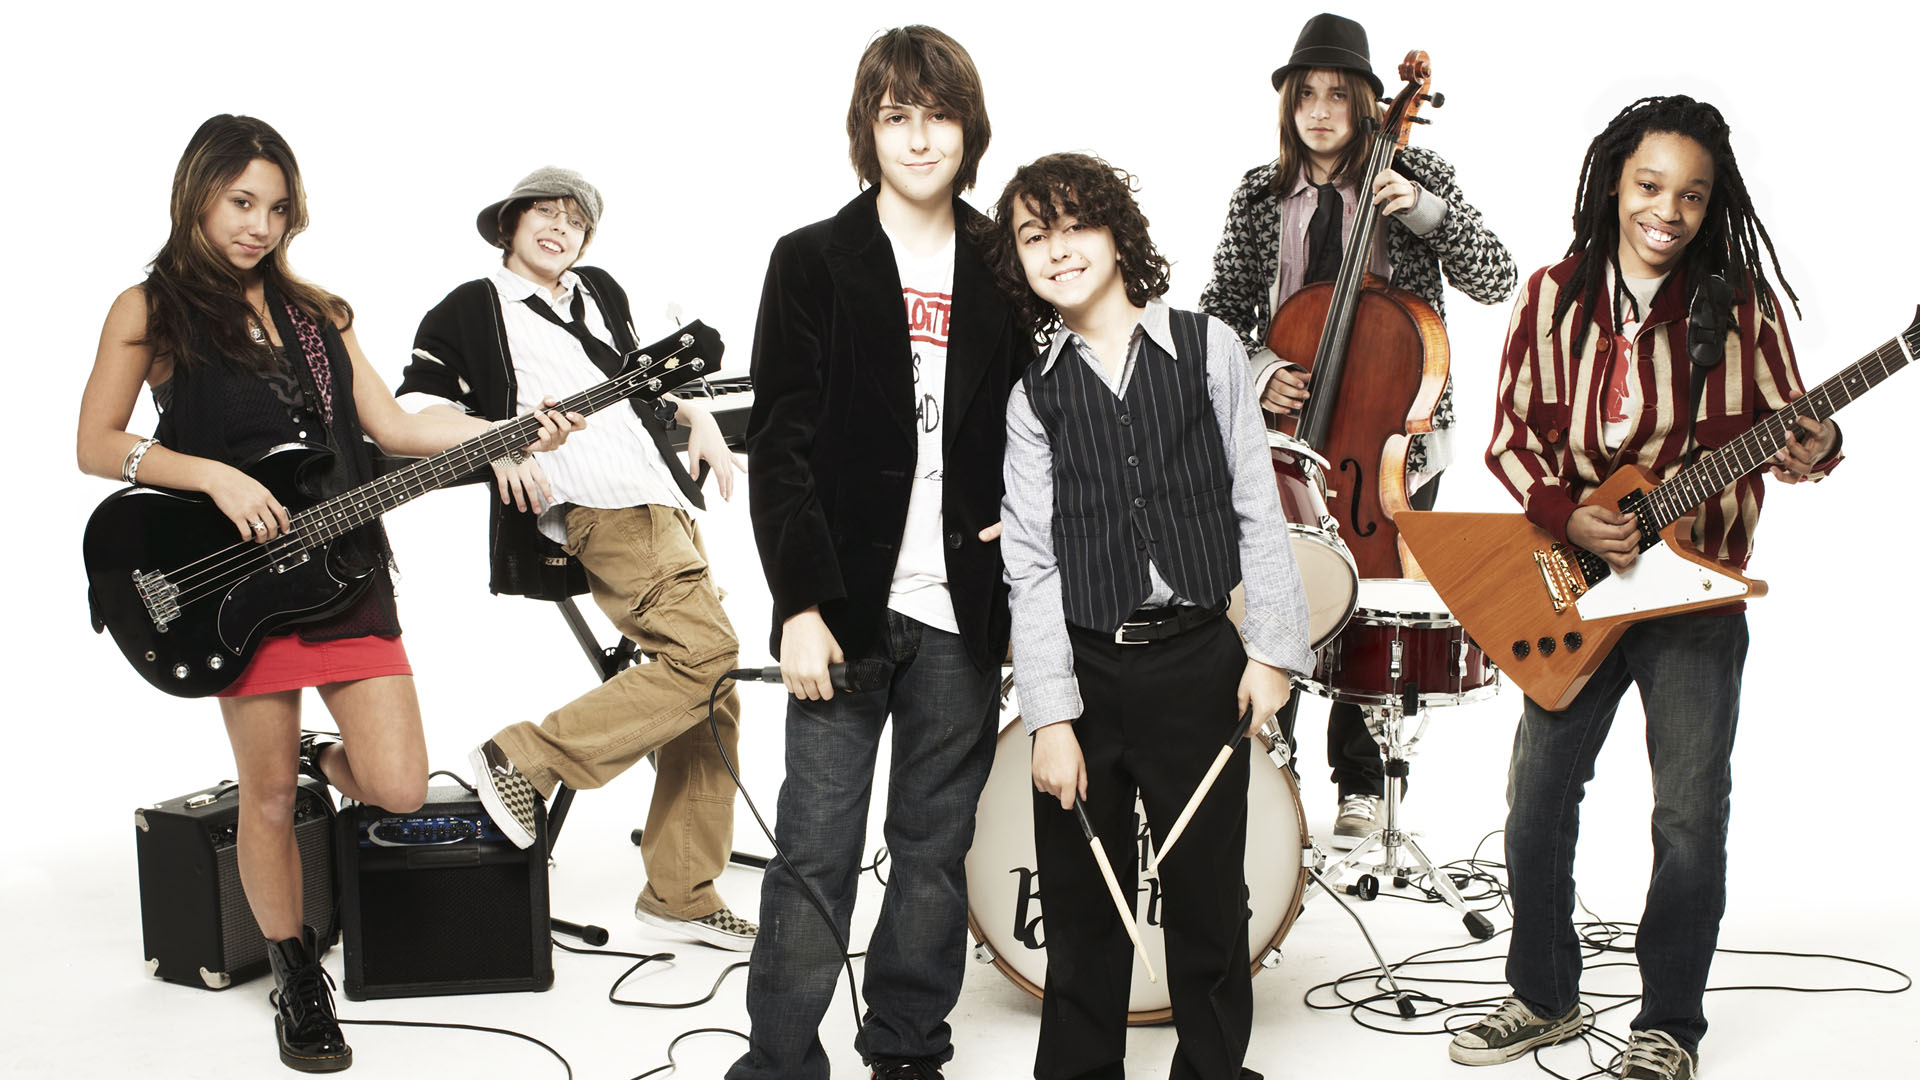 Naked brothers band tour dates and concert tickets